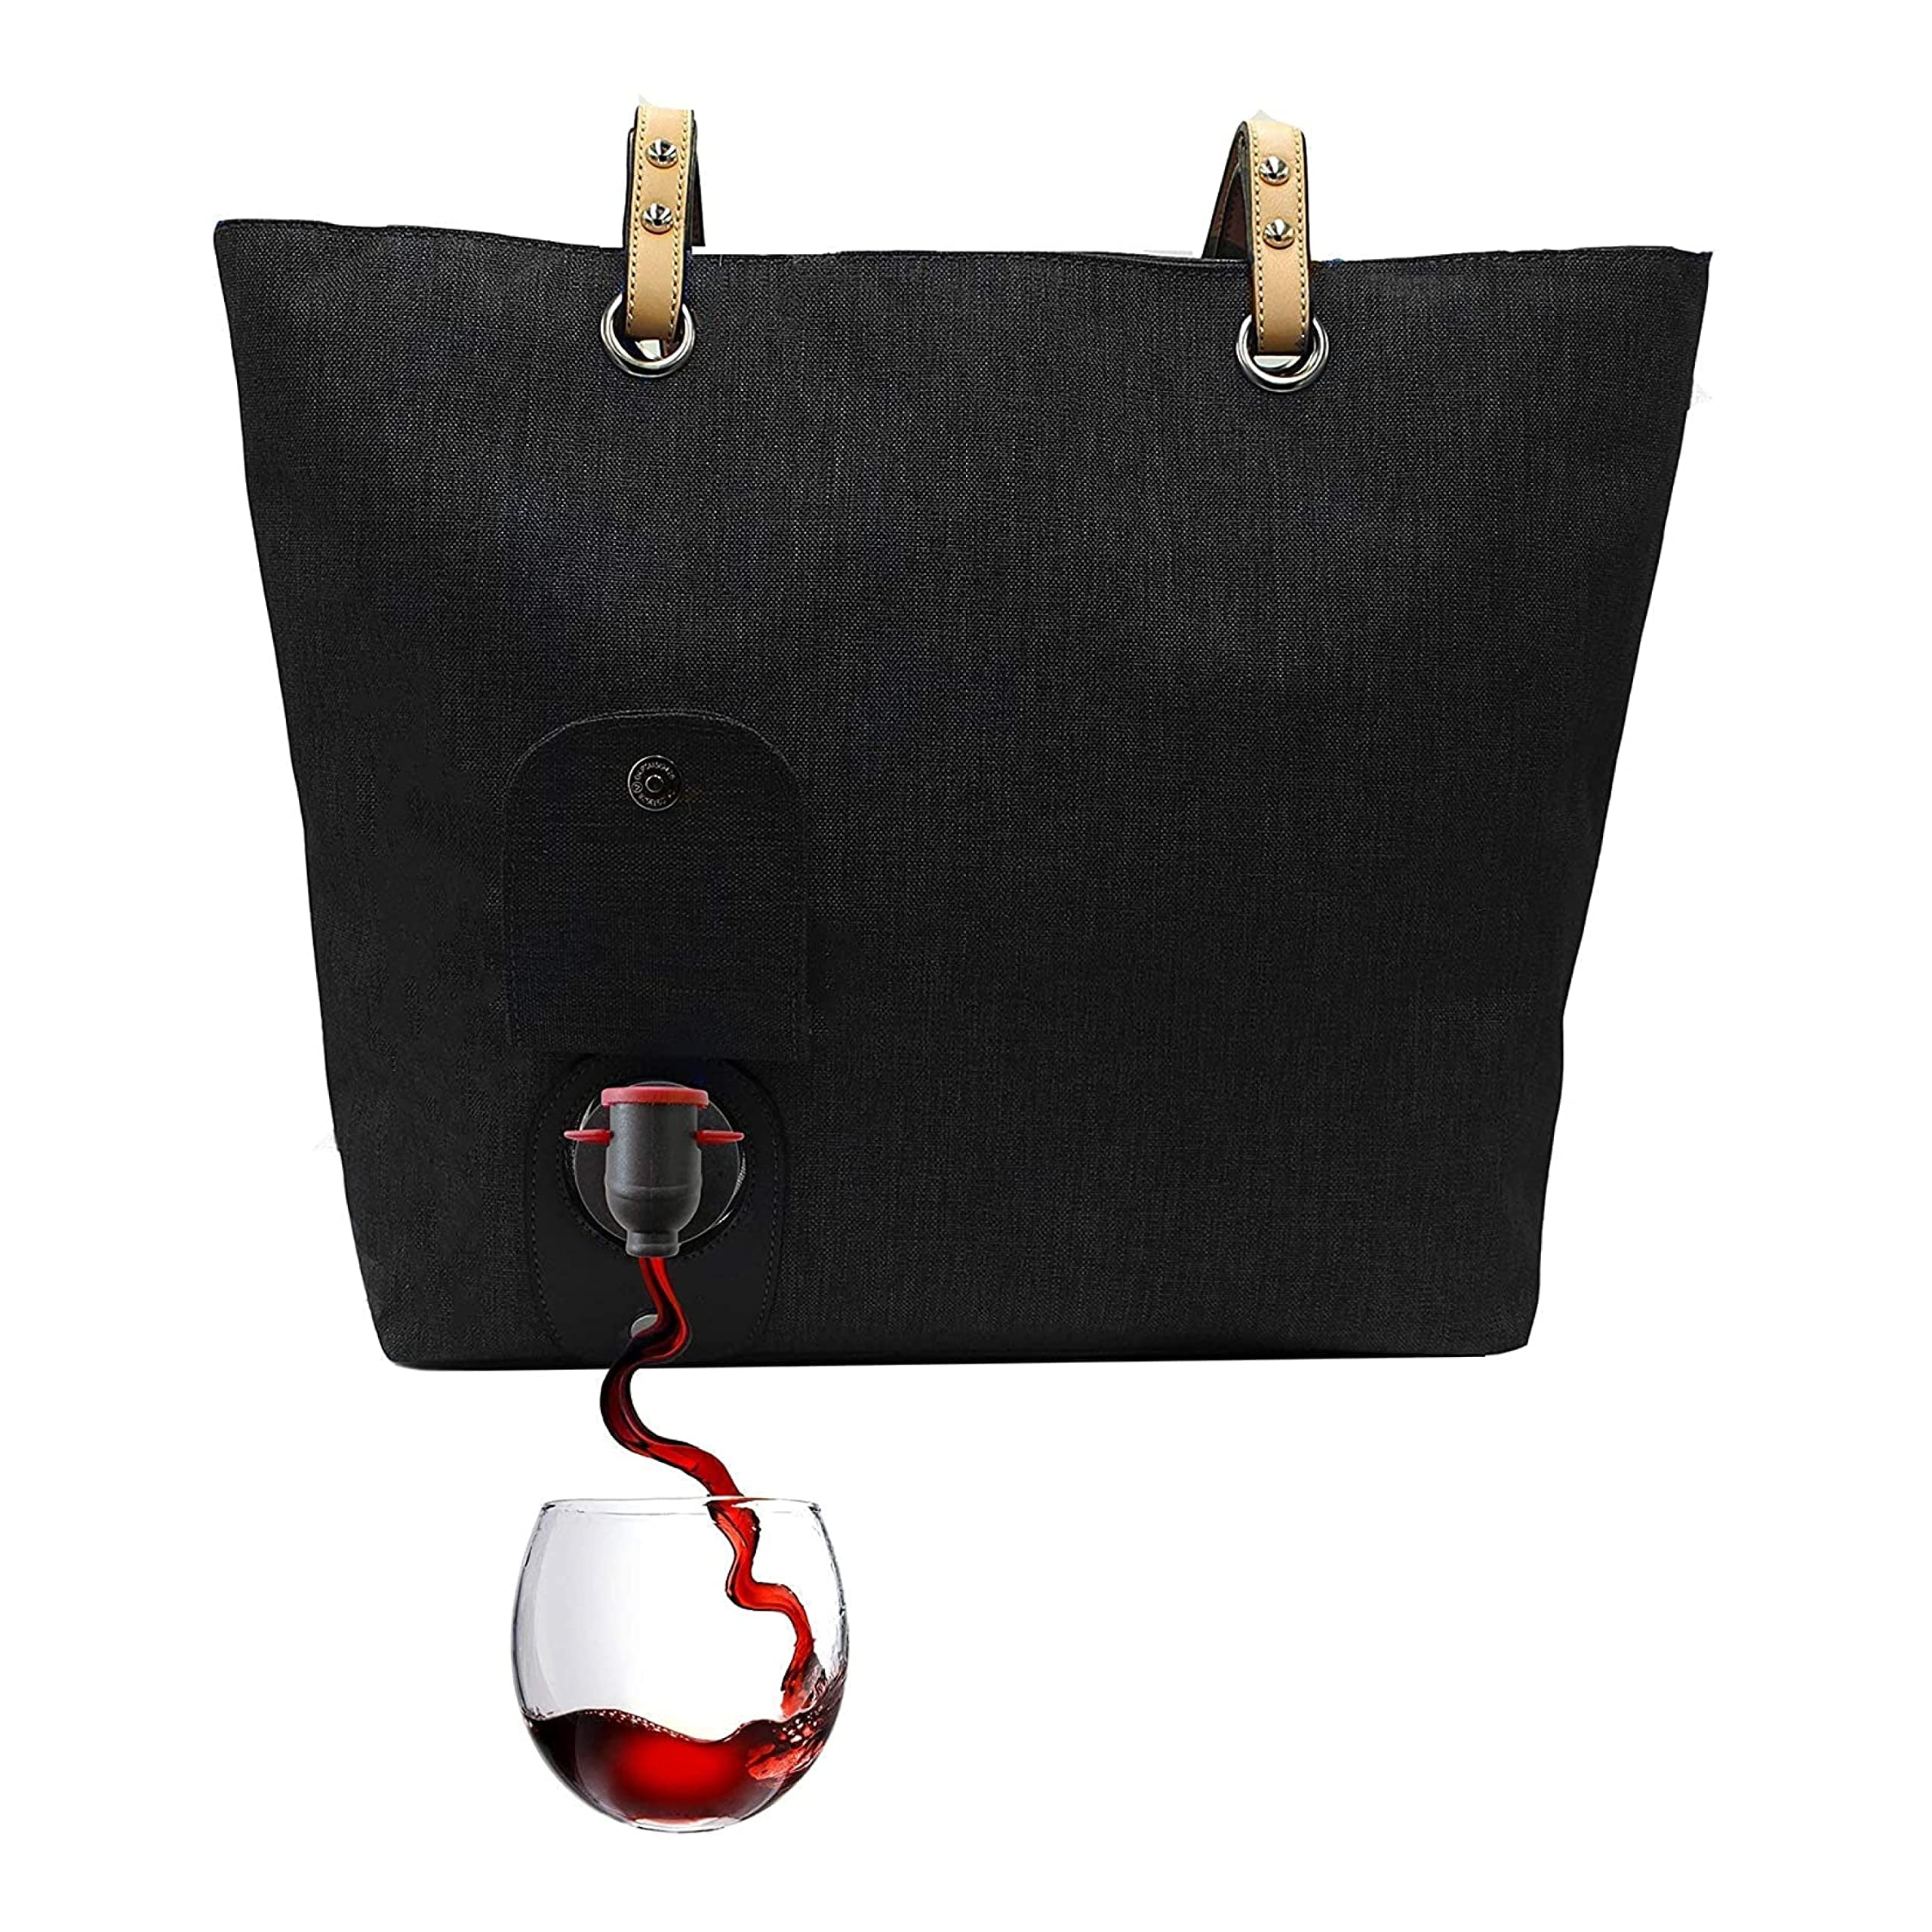  Primeware Wine Clutch Bag (Thermal Insulated) Trendy Women's  Carry Tote, Holds Red & White 750mL Bottles, Trendy Fashion